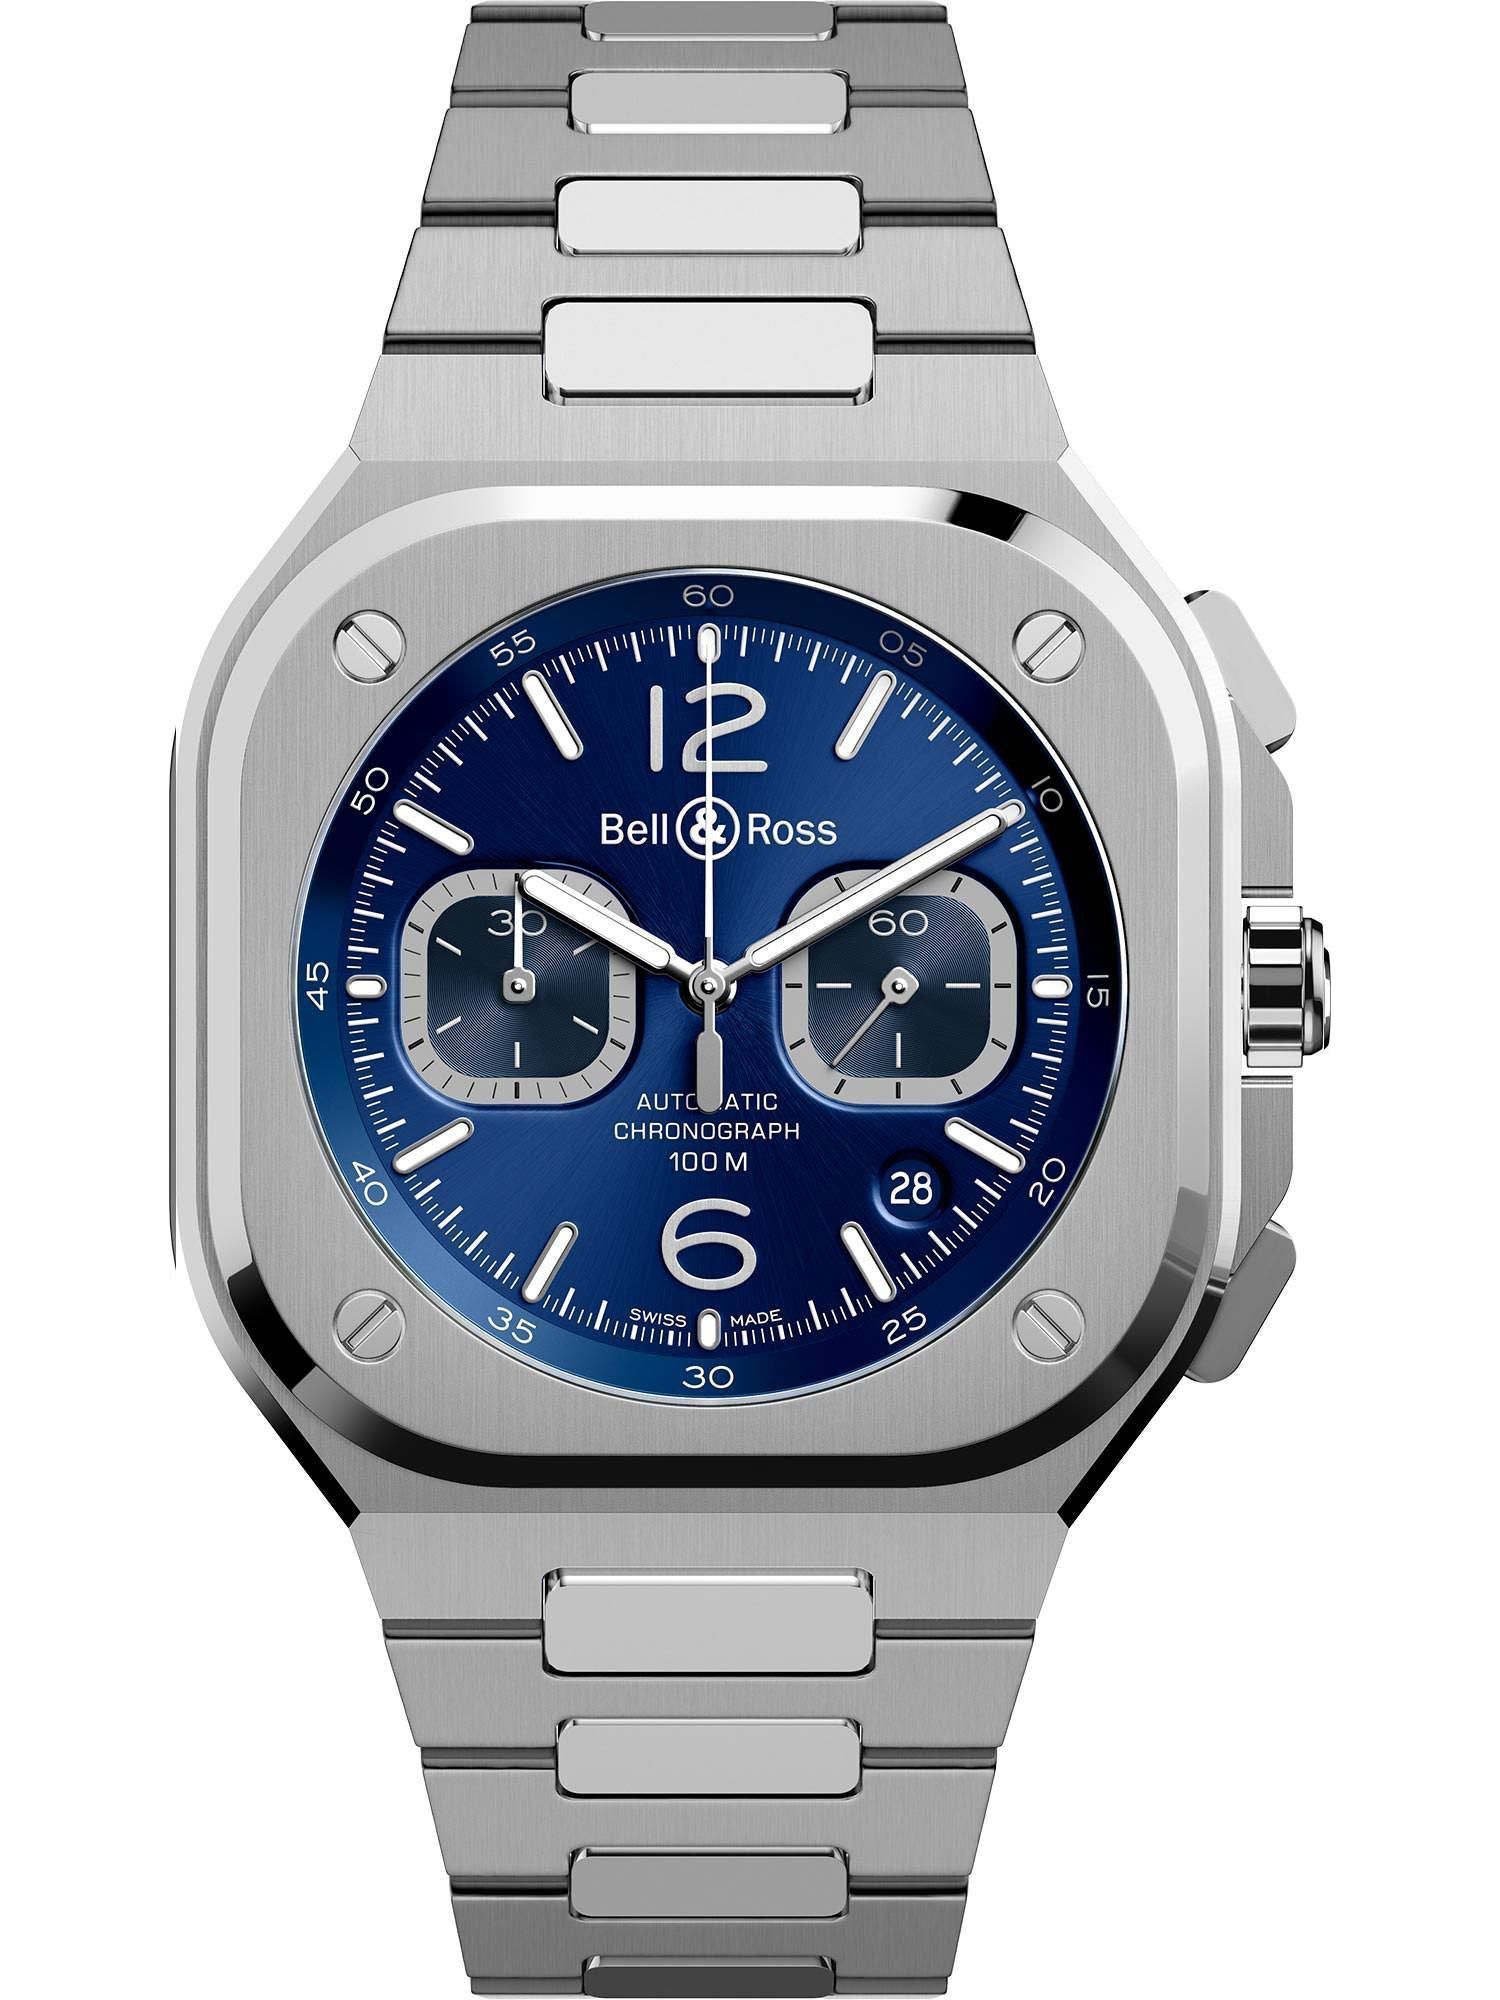 Bell & Ross Urban BR 05 Chrono Blue Dial 42 mm Automatic Watch For Men - 1